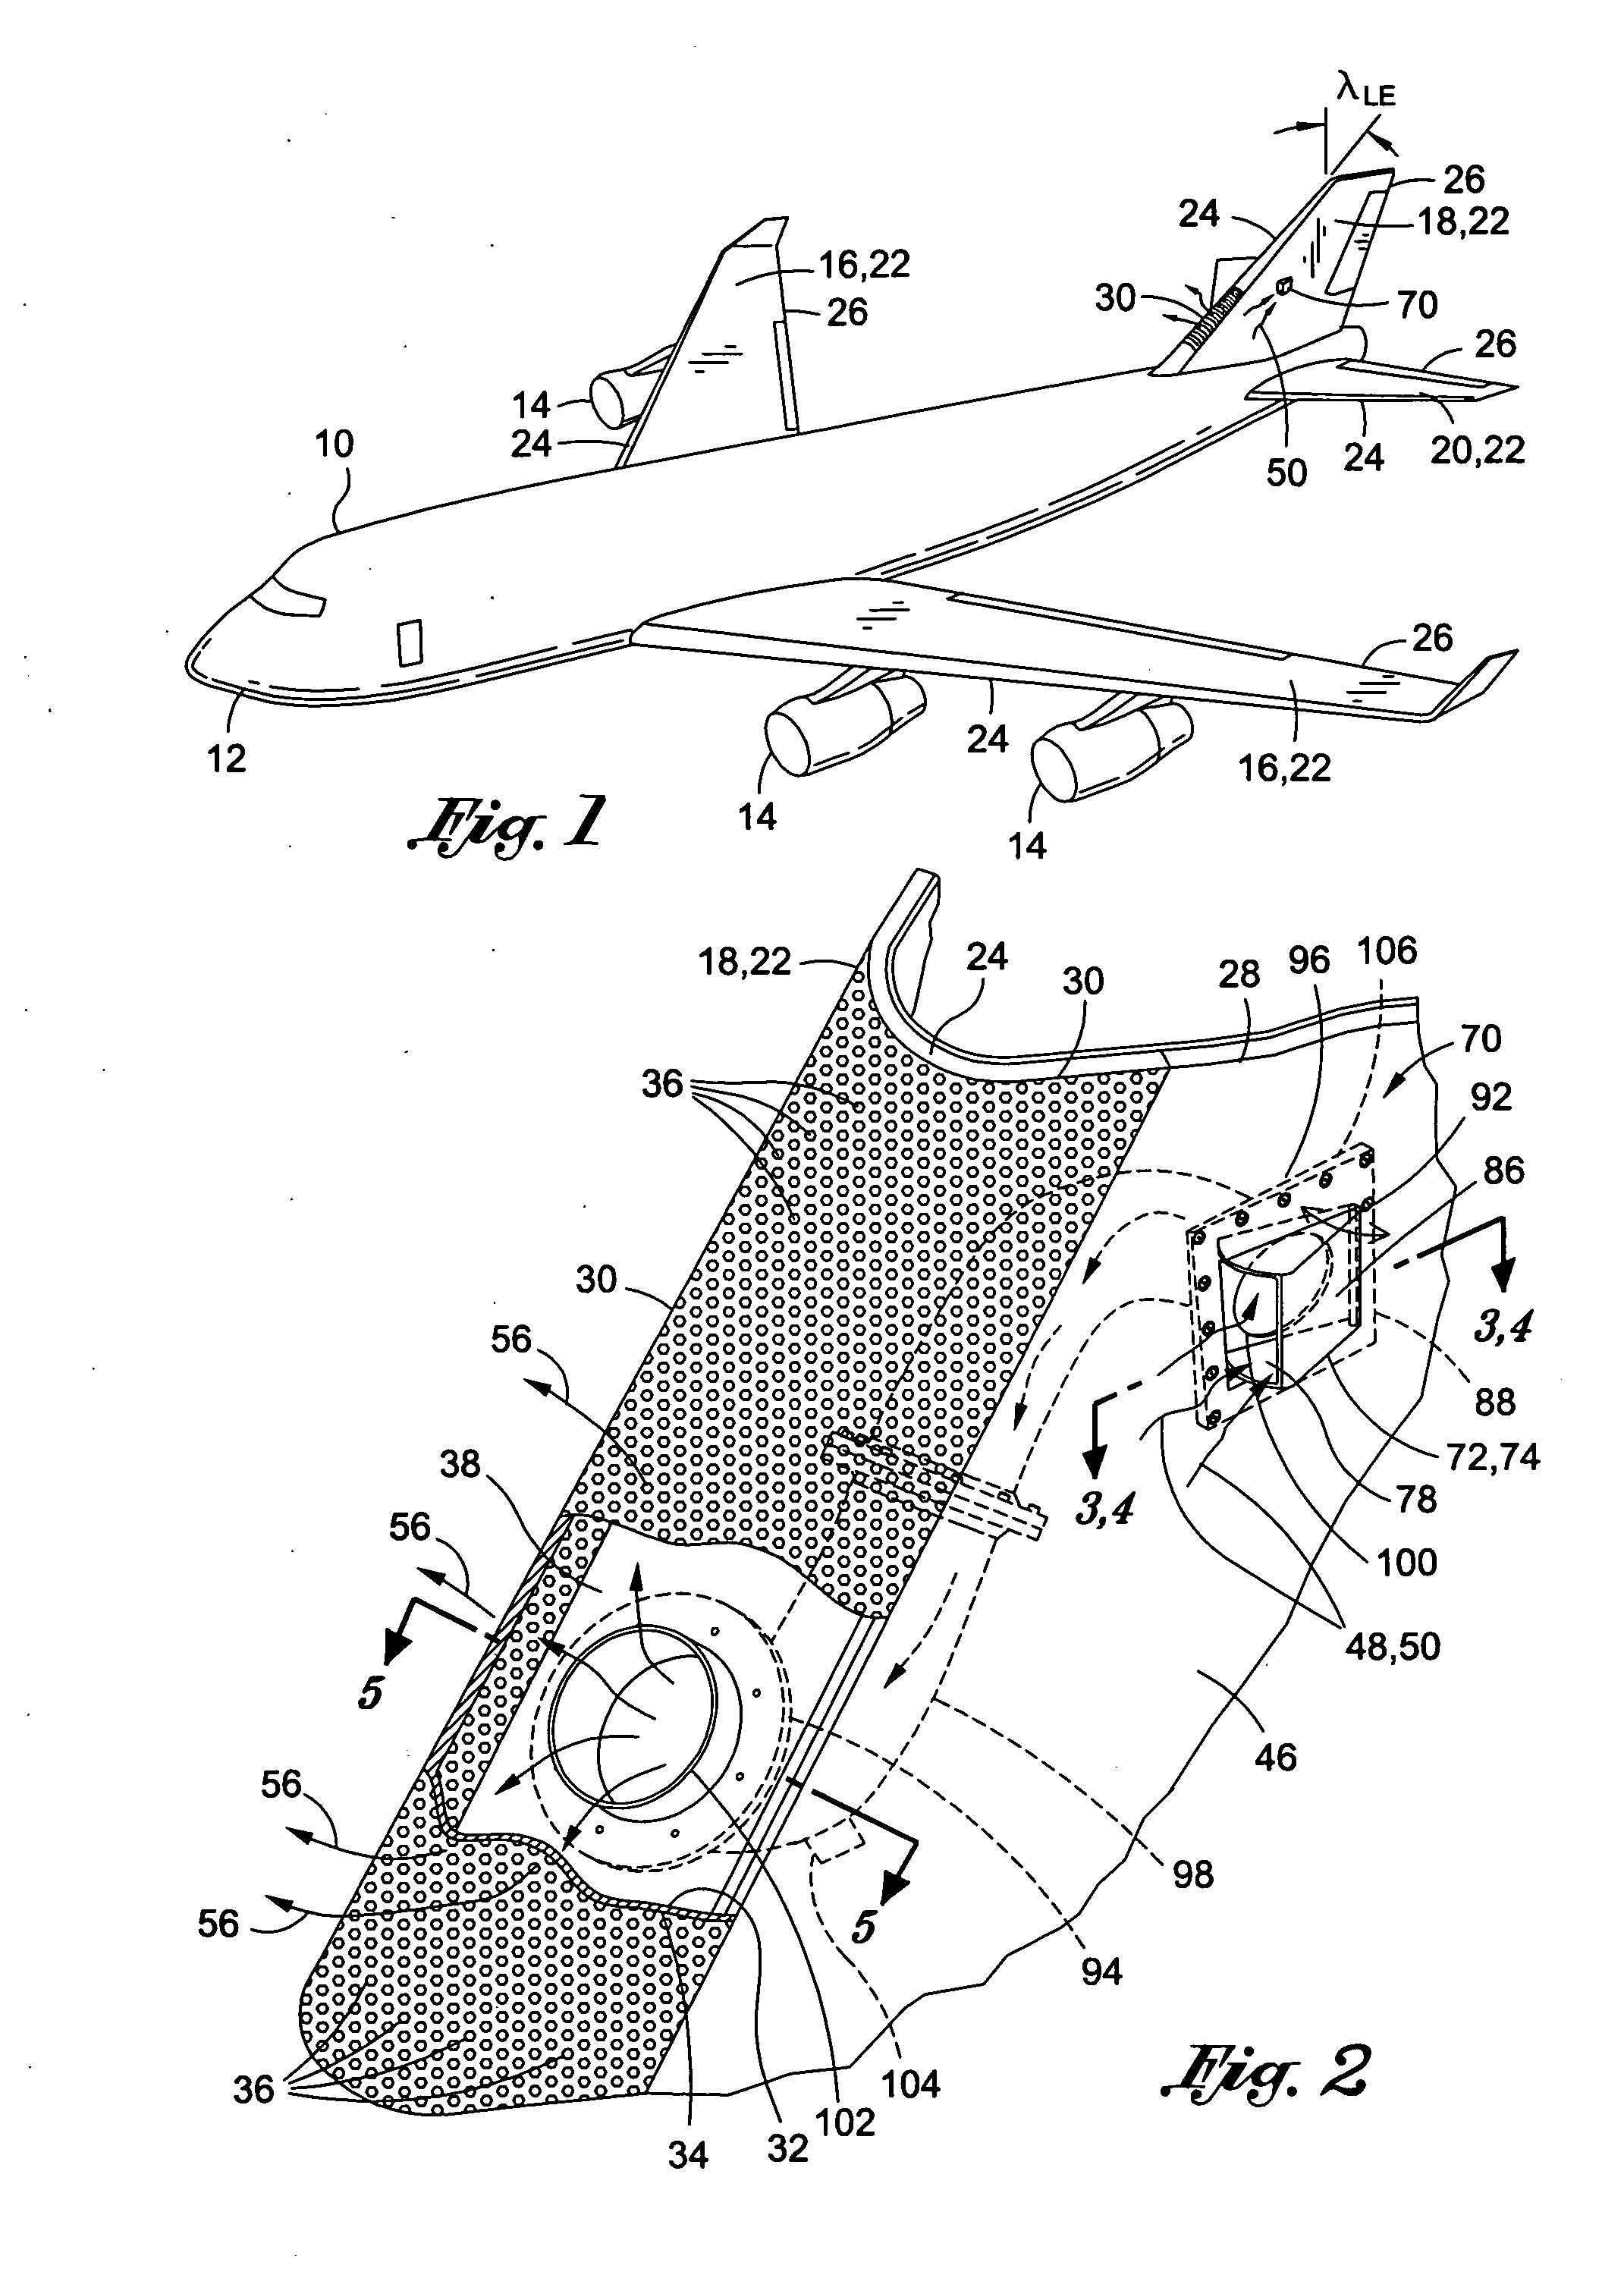 Apparatus & method for passive purging of micro-perforated aerodynamic surfaces